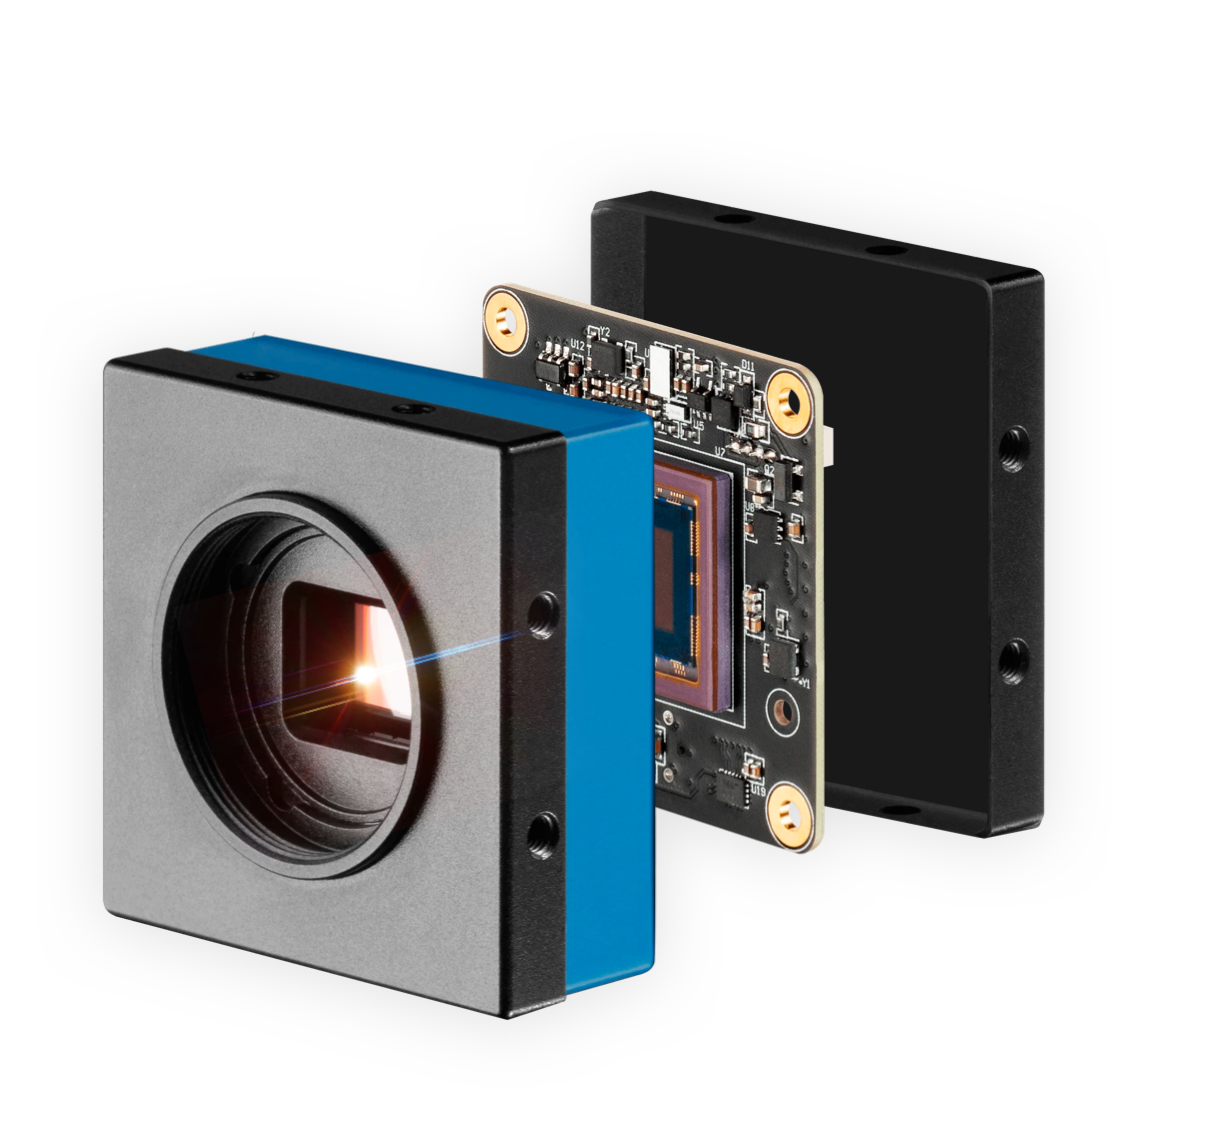 Photo of the Scorpion Vision camera for machine vision automation.